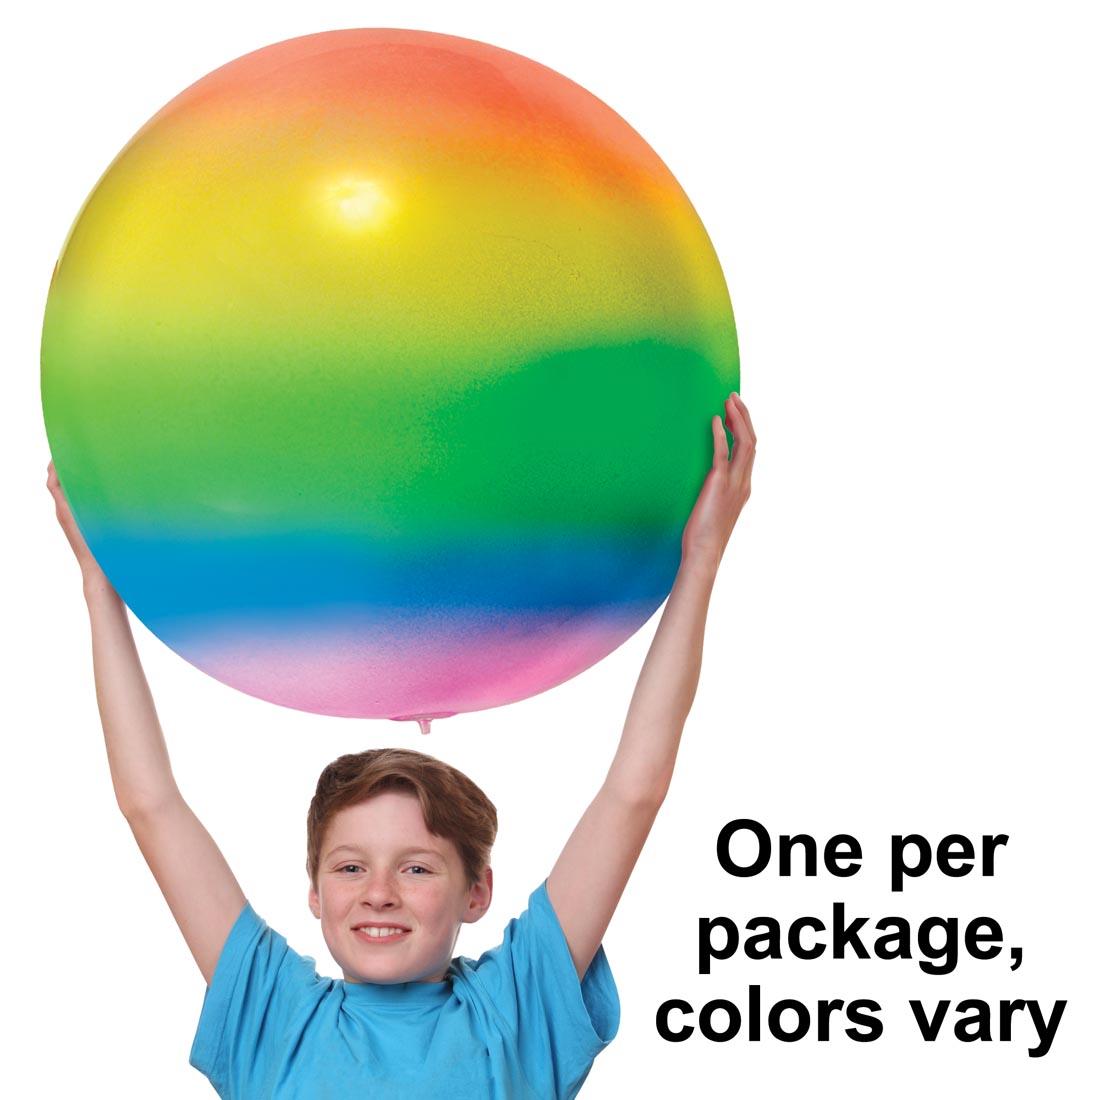 child holding a Jumbo Jelly Ball over their head, with the text One per package, colors vary